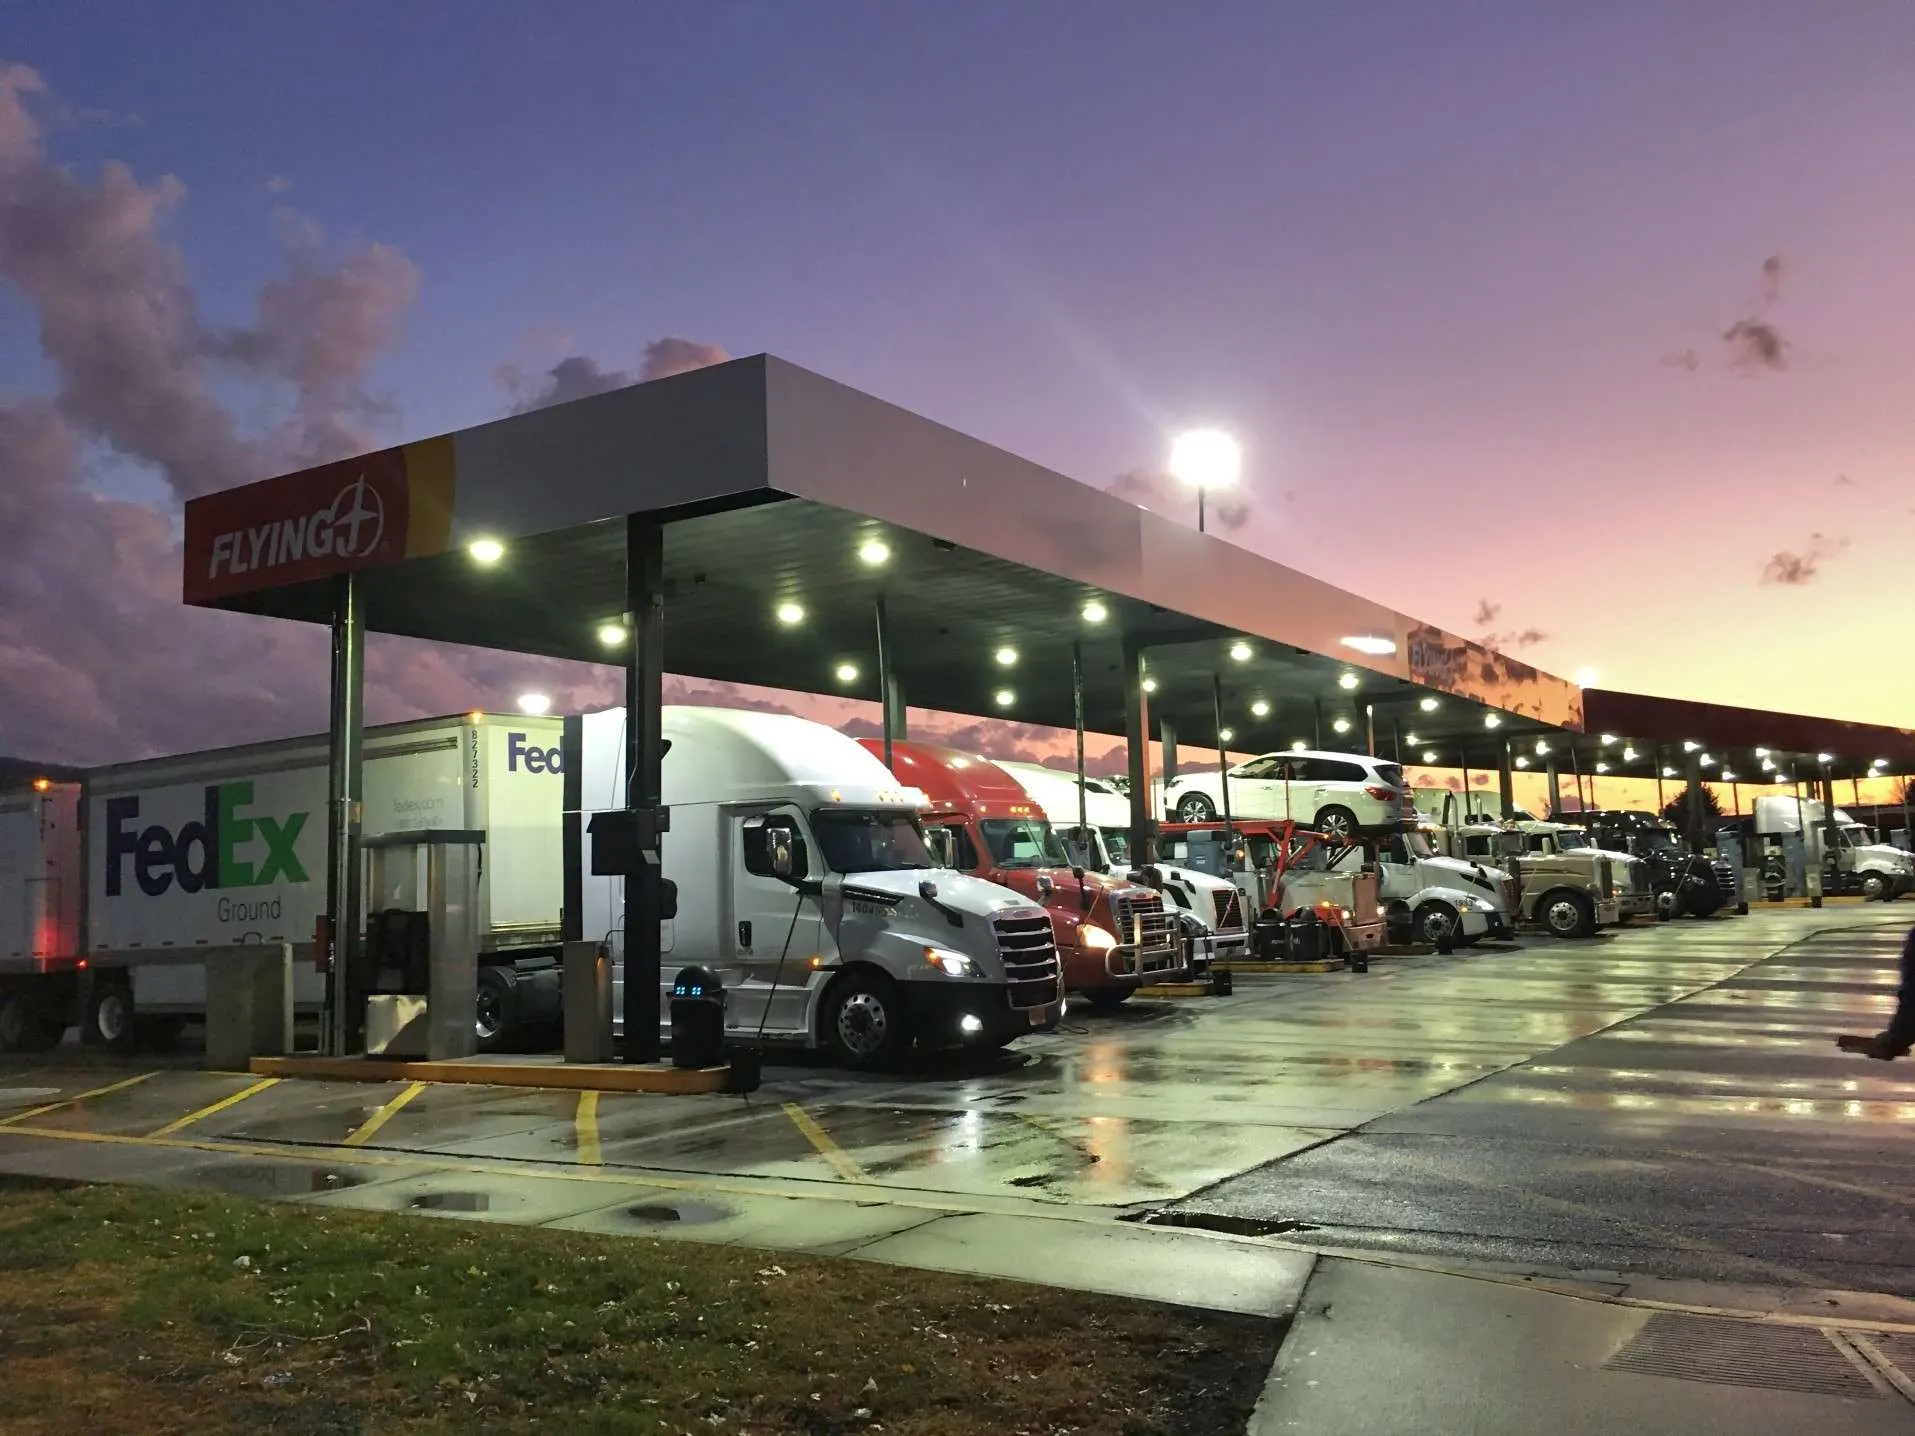 Flying J truck stop with trucks and RVs parked.